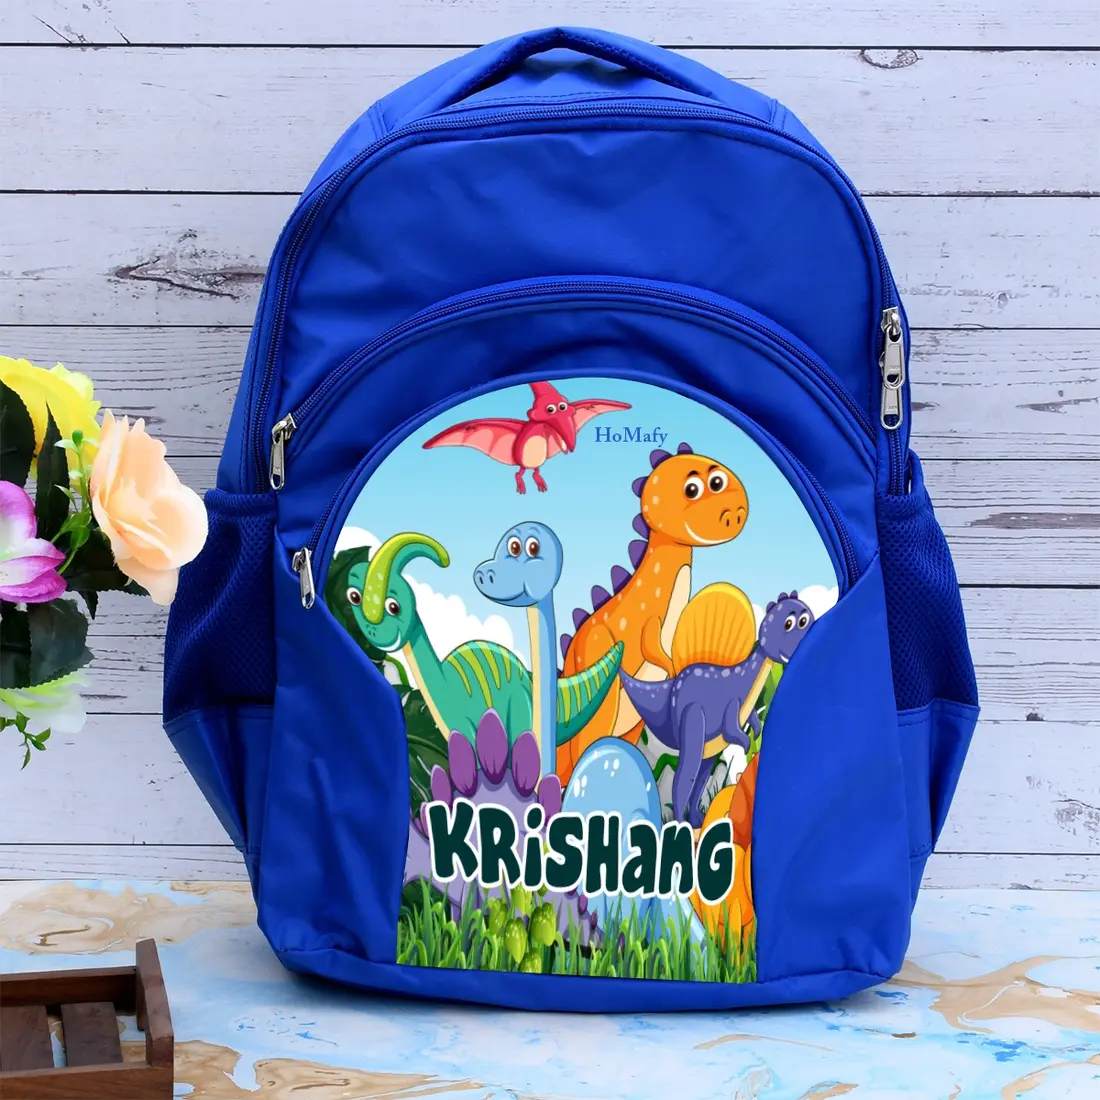 Customized School Bags | Kids bags with name - HoMafy